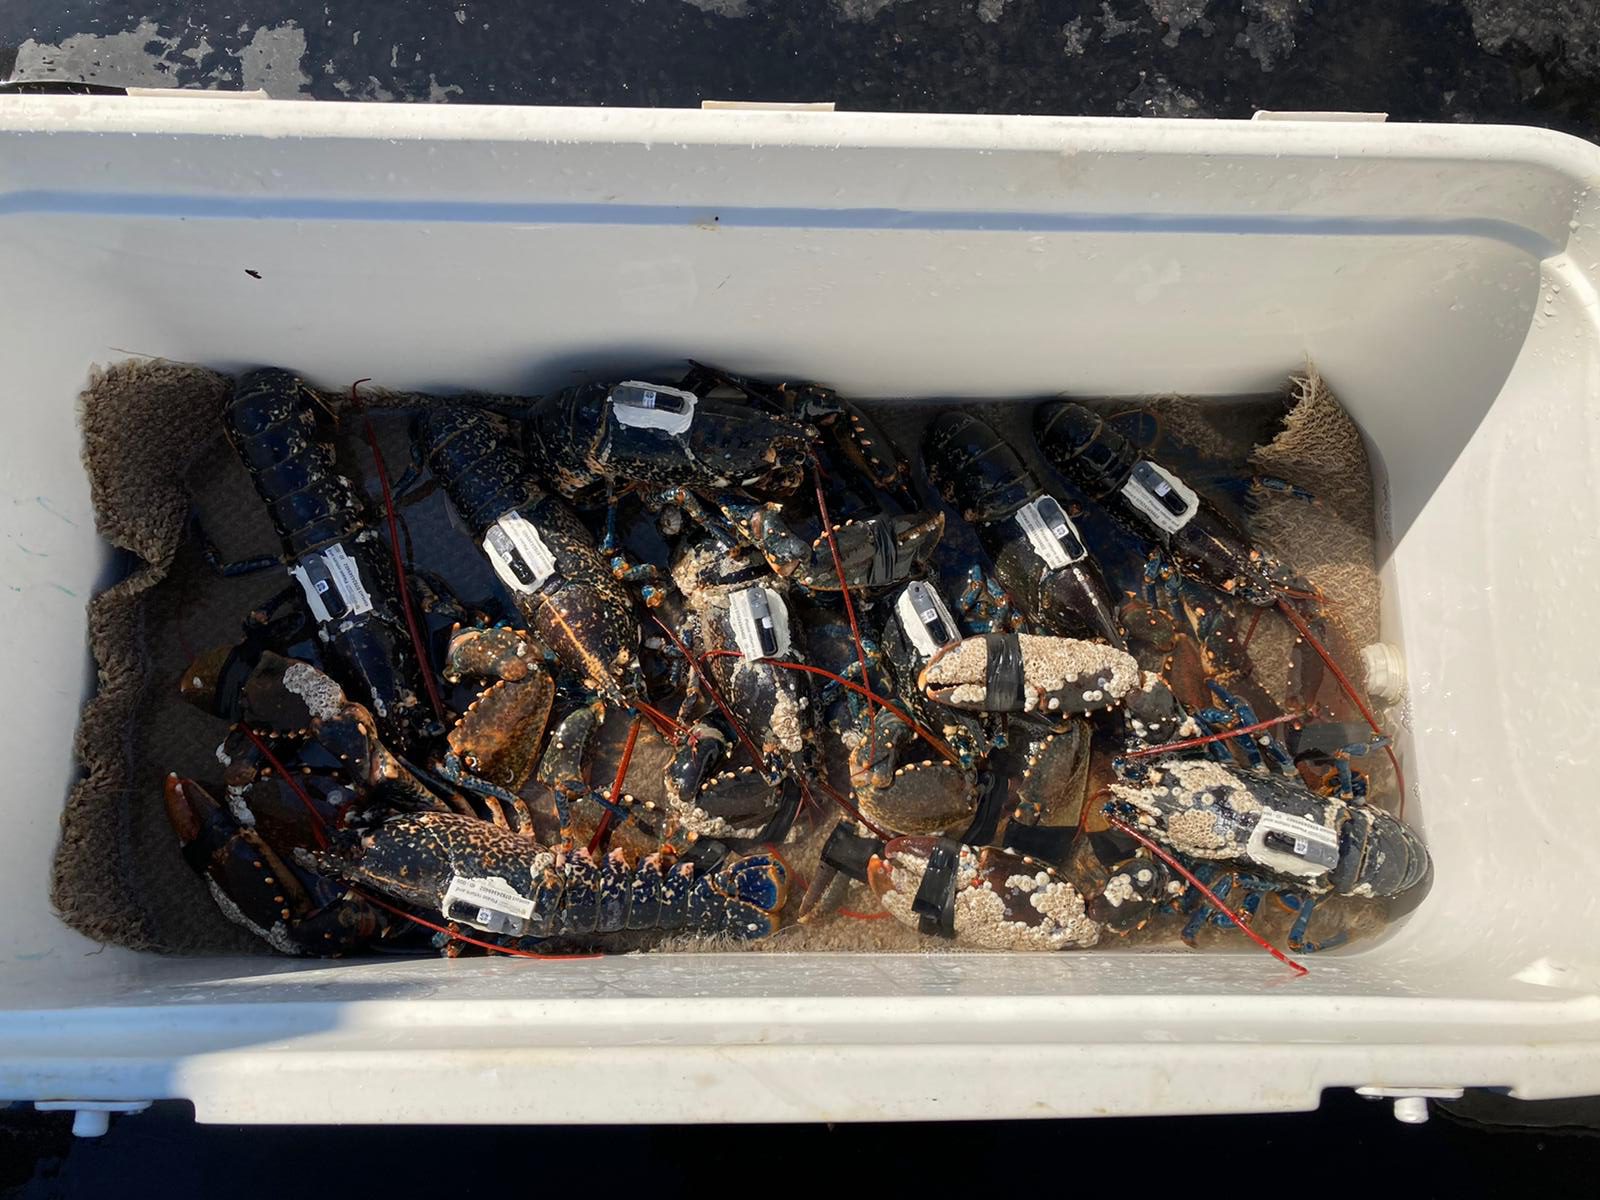 Lobsters ready for employment in an acoustic telemetry study by Ecostructure in the Irish Sea.